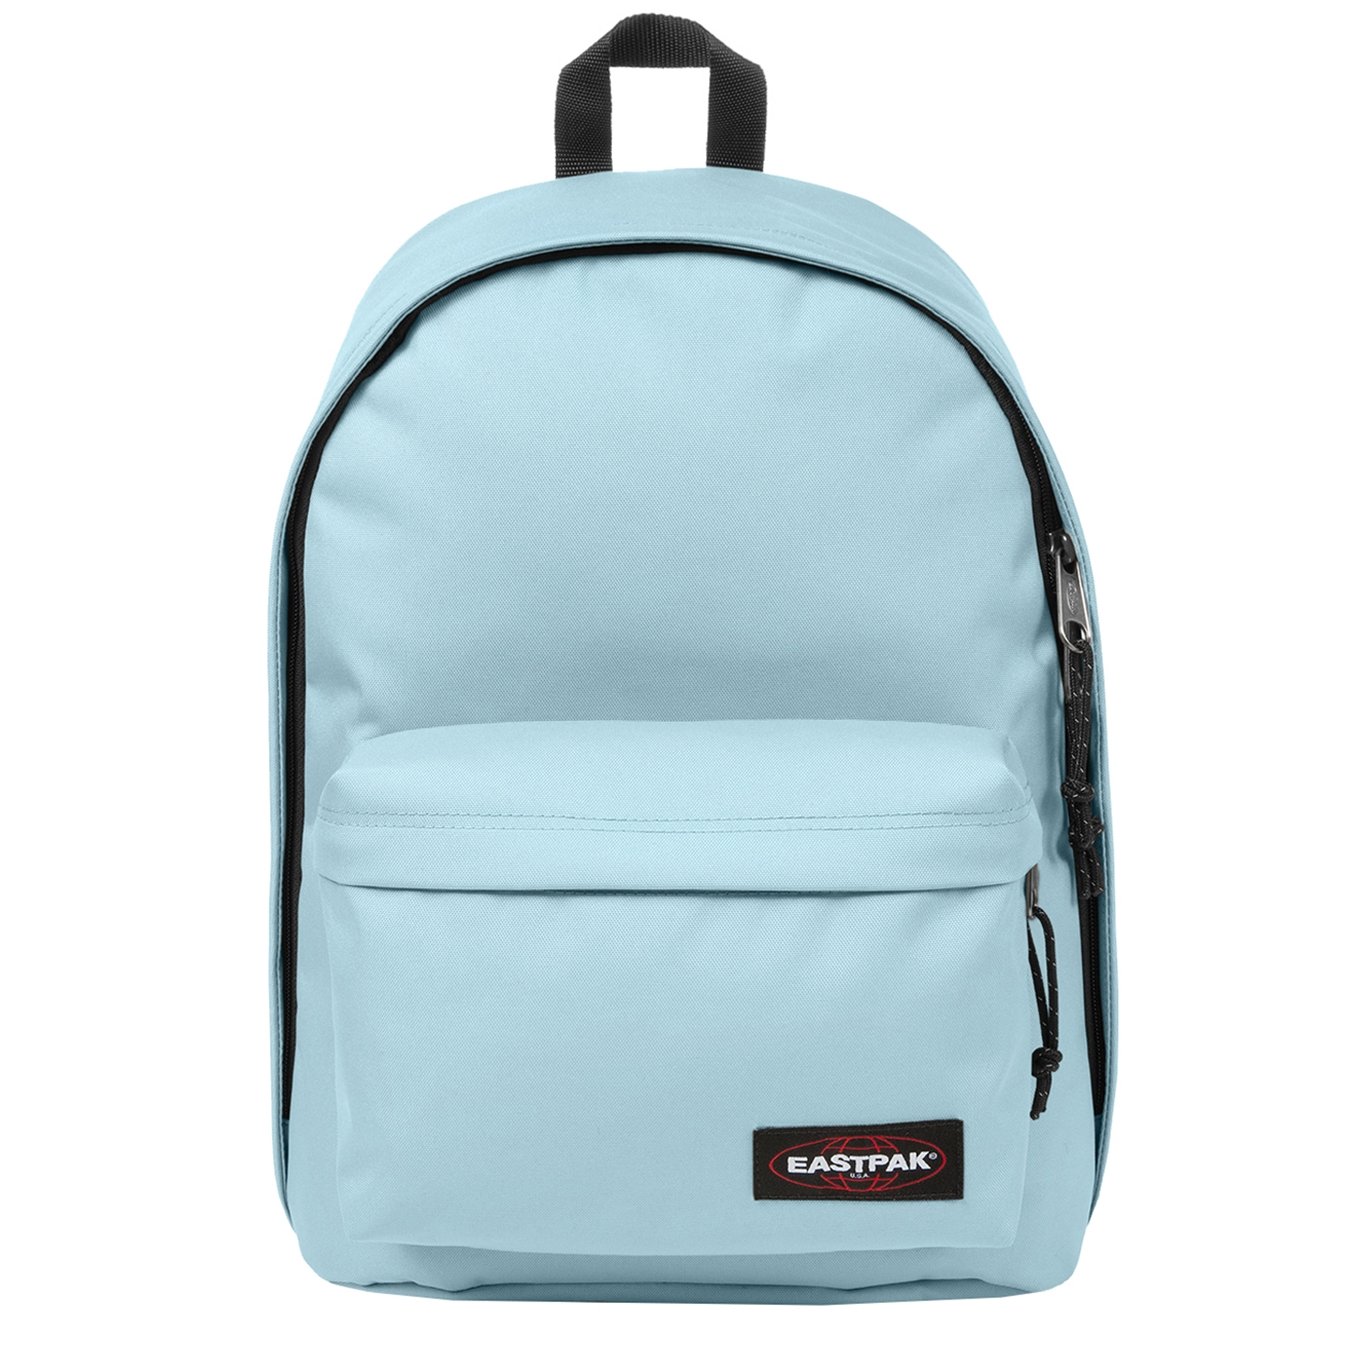 gebed Terugbetaling verlichten Eastpak Out Of Office born blue | Travelbags.nl